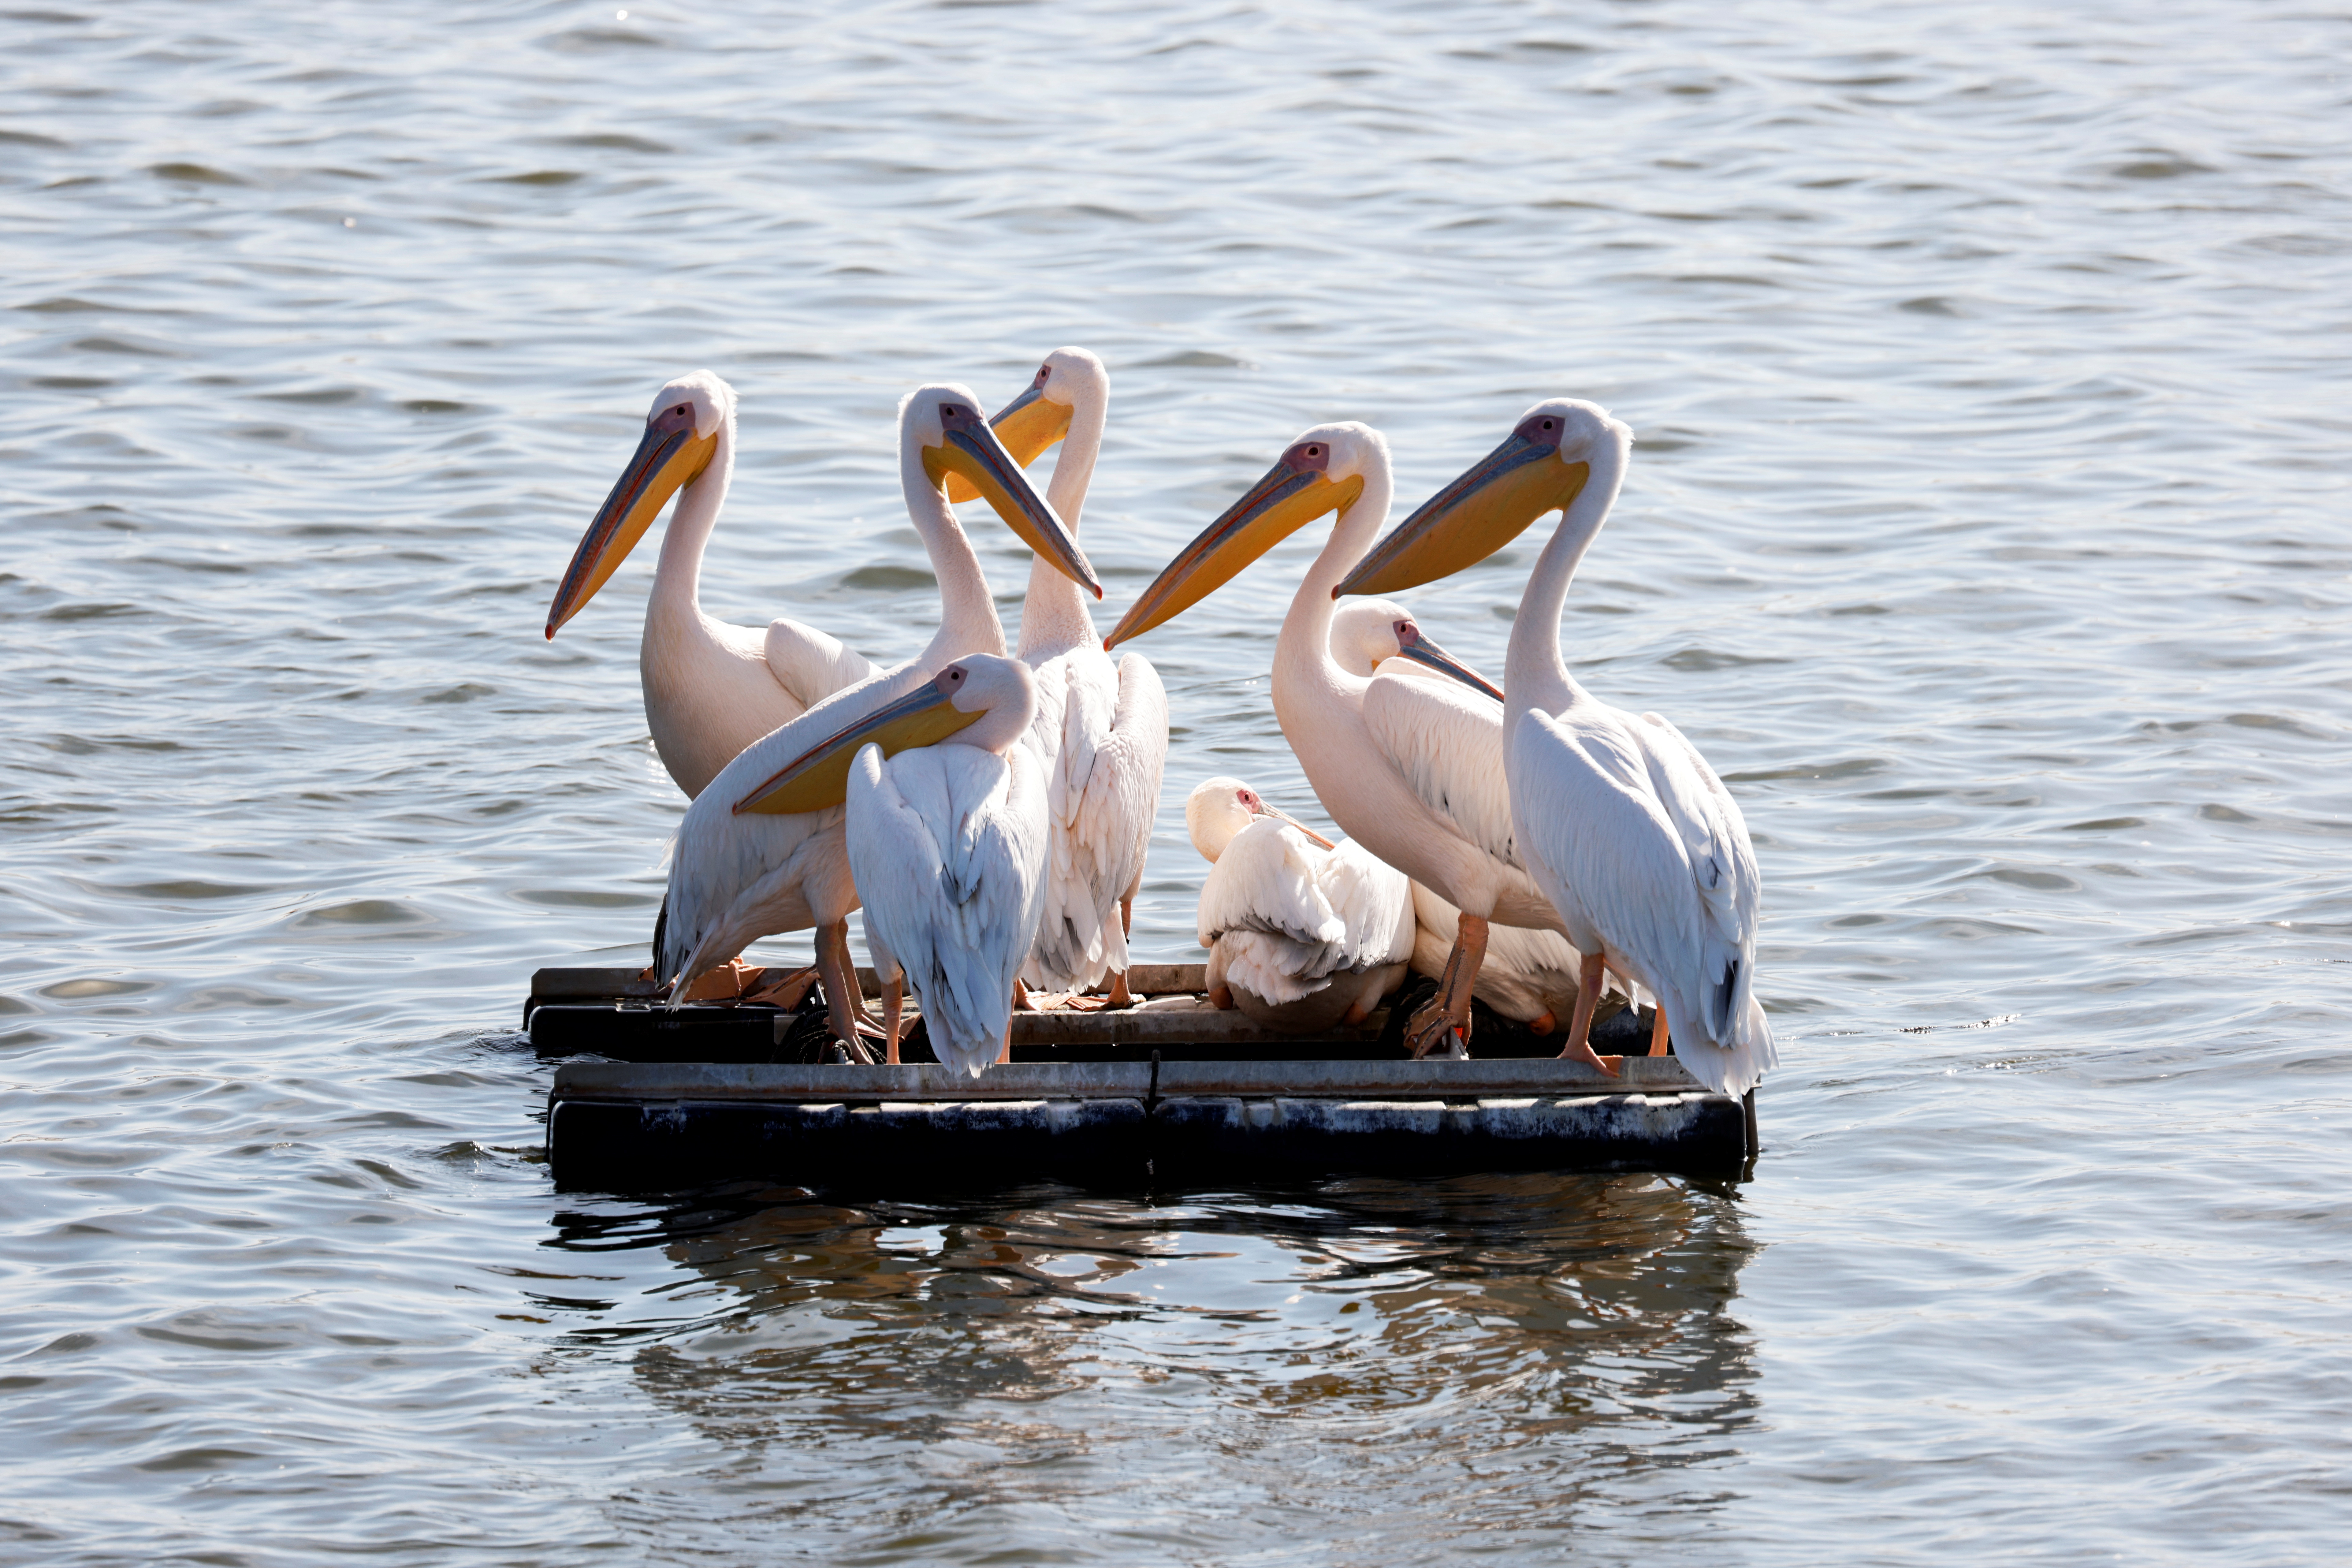 Migrating Great White pelicans gather at a water reservoir in central Israel